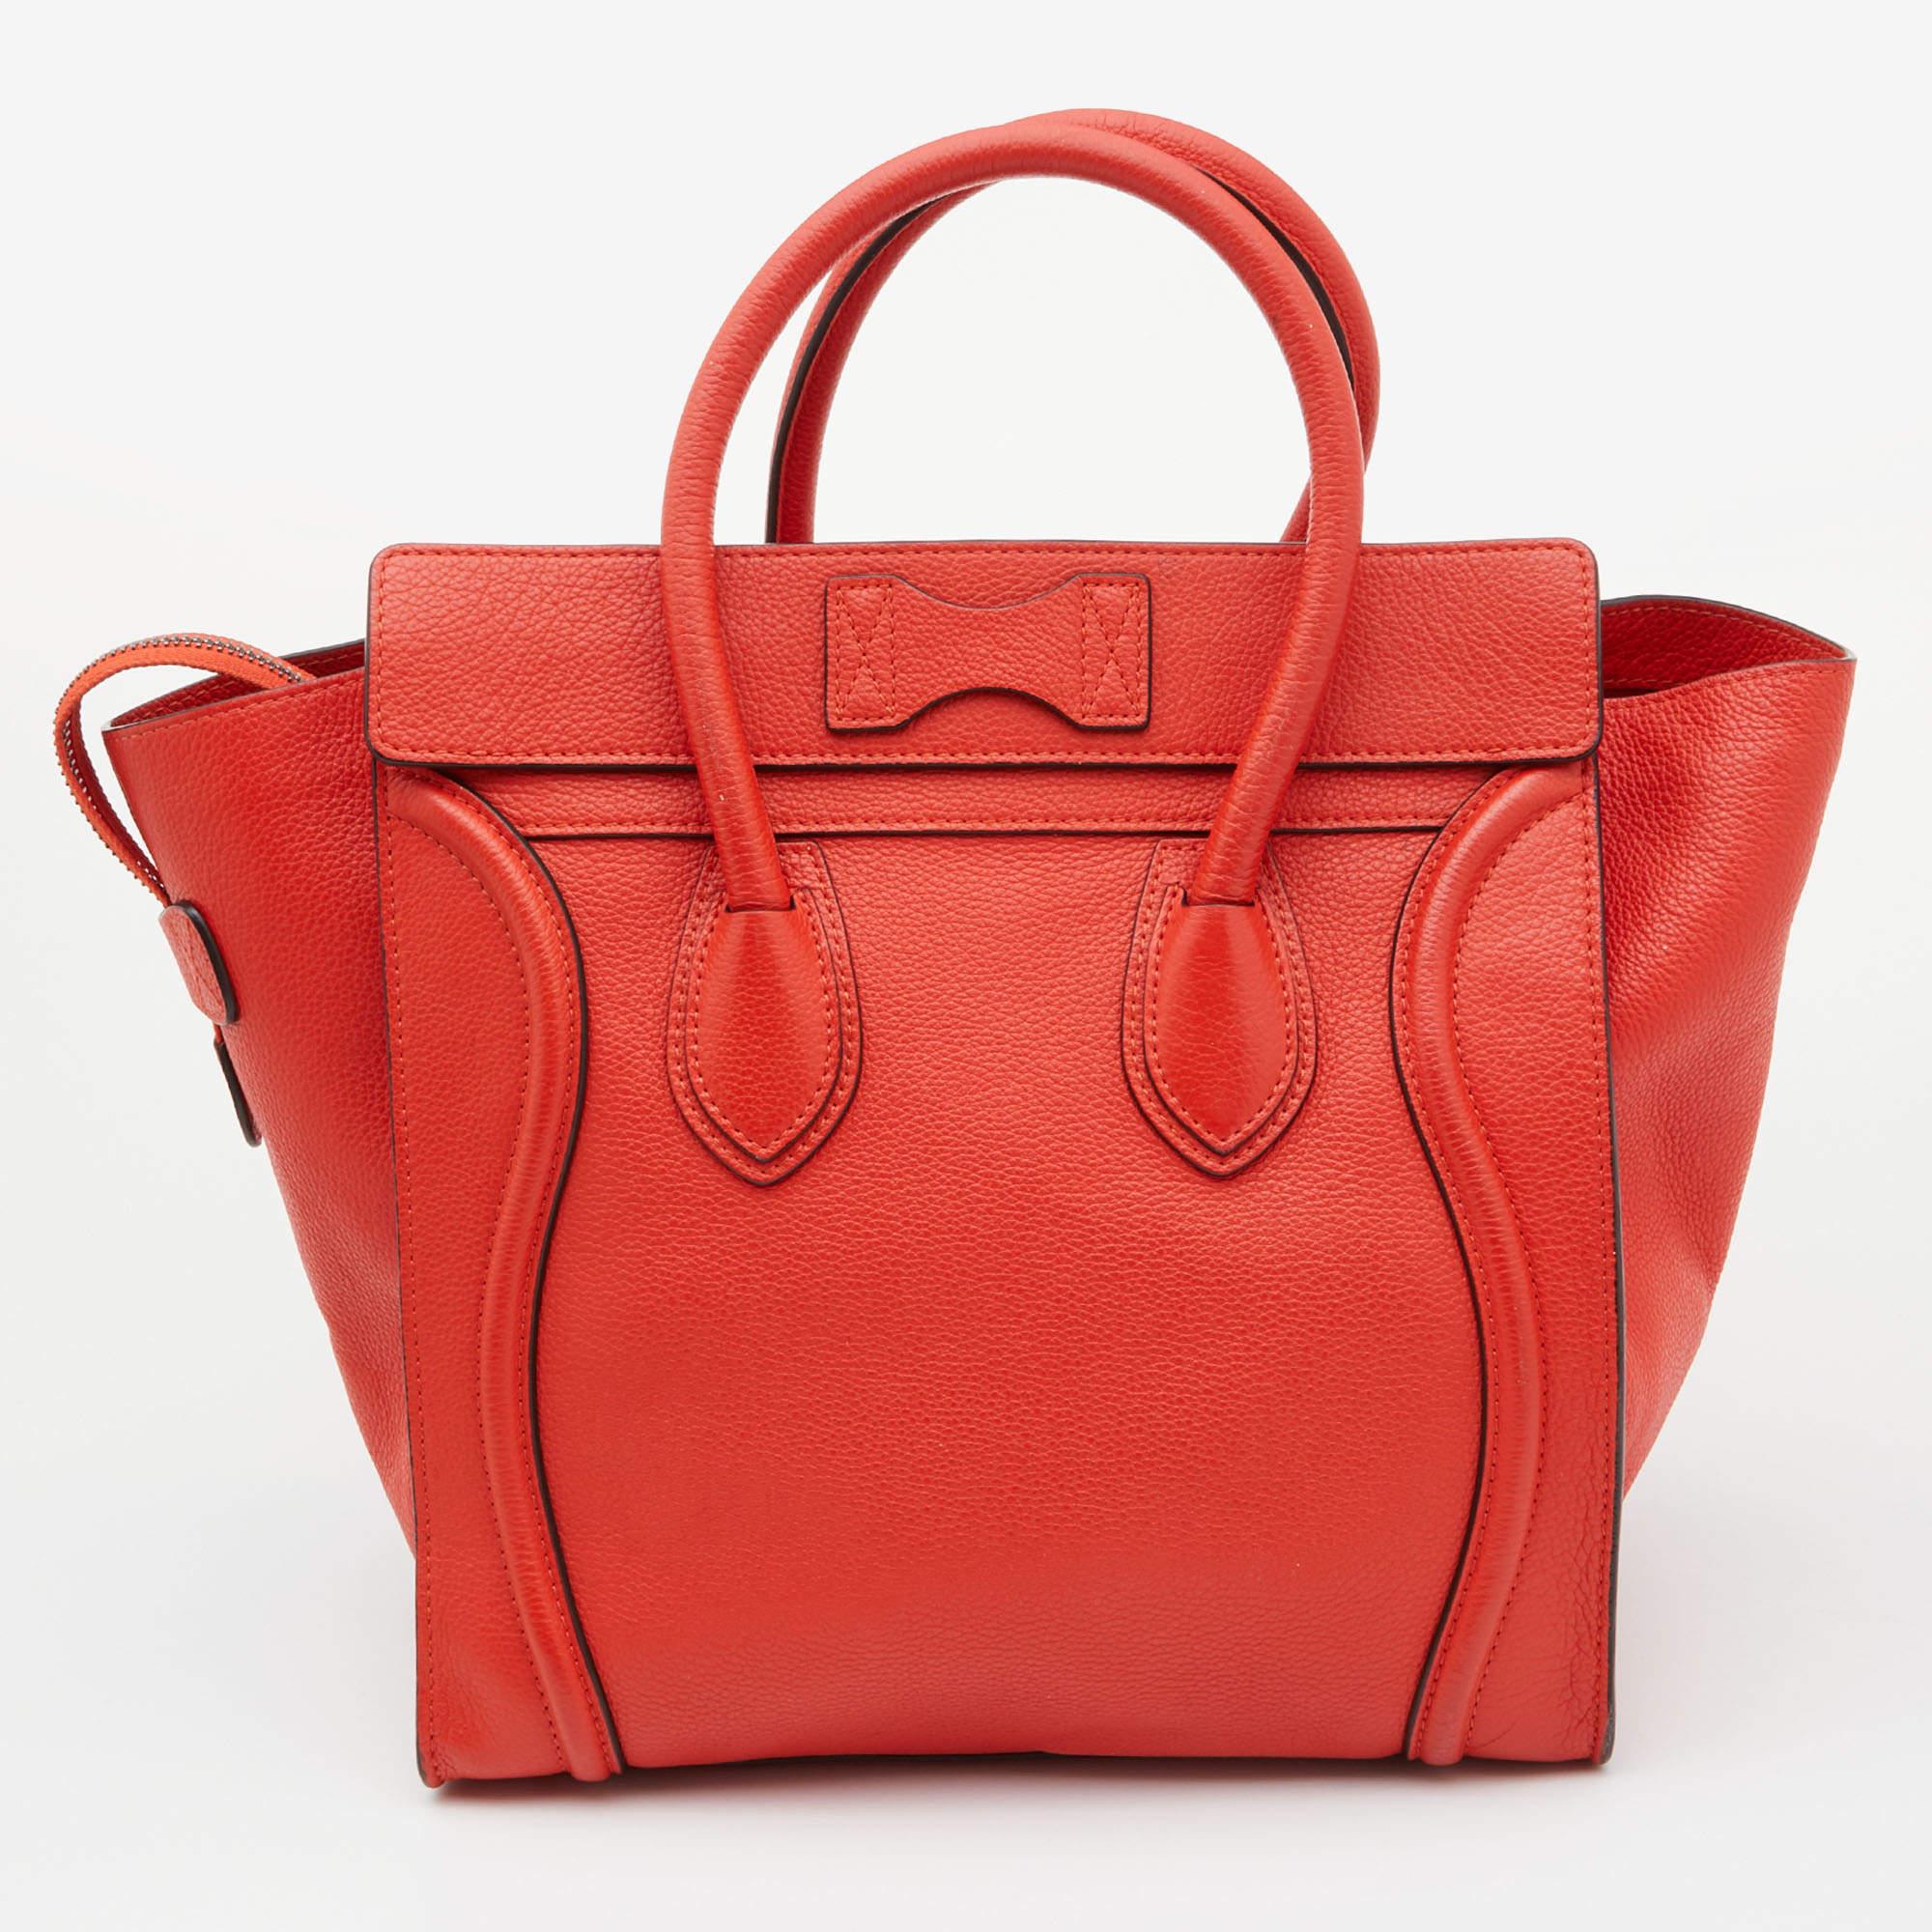 The usage of orange leather on the exterior gives this Celine tote a classy appeal. An eye-catching accessory, the bag features a front zipper pocket, dual handles at the top, and silver-tone hardware. The Alcantara-lined interior is equipped to